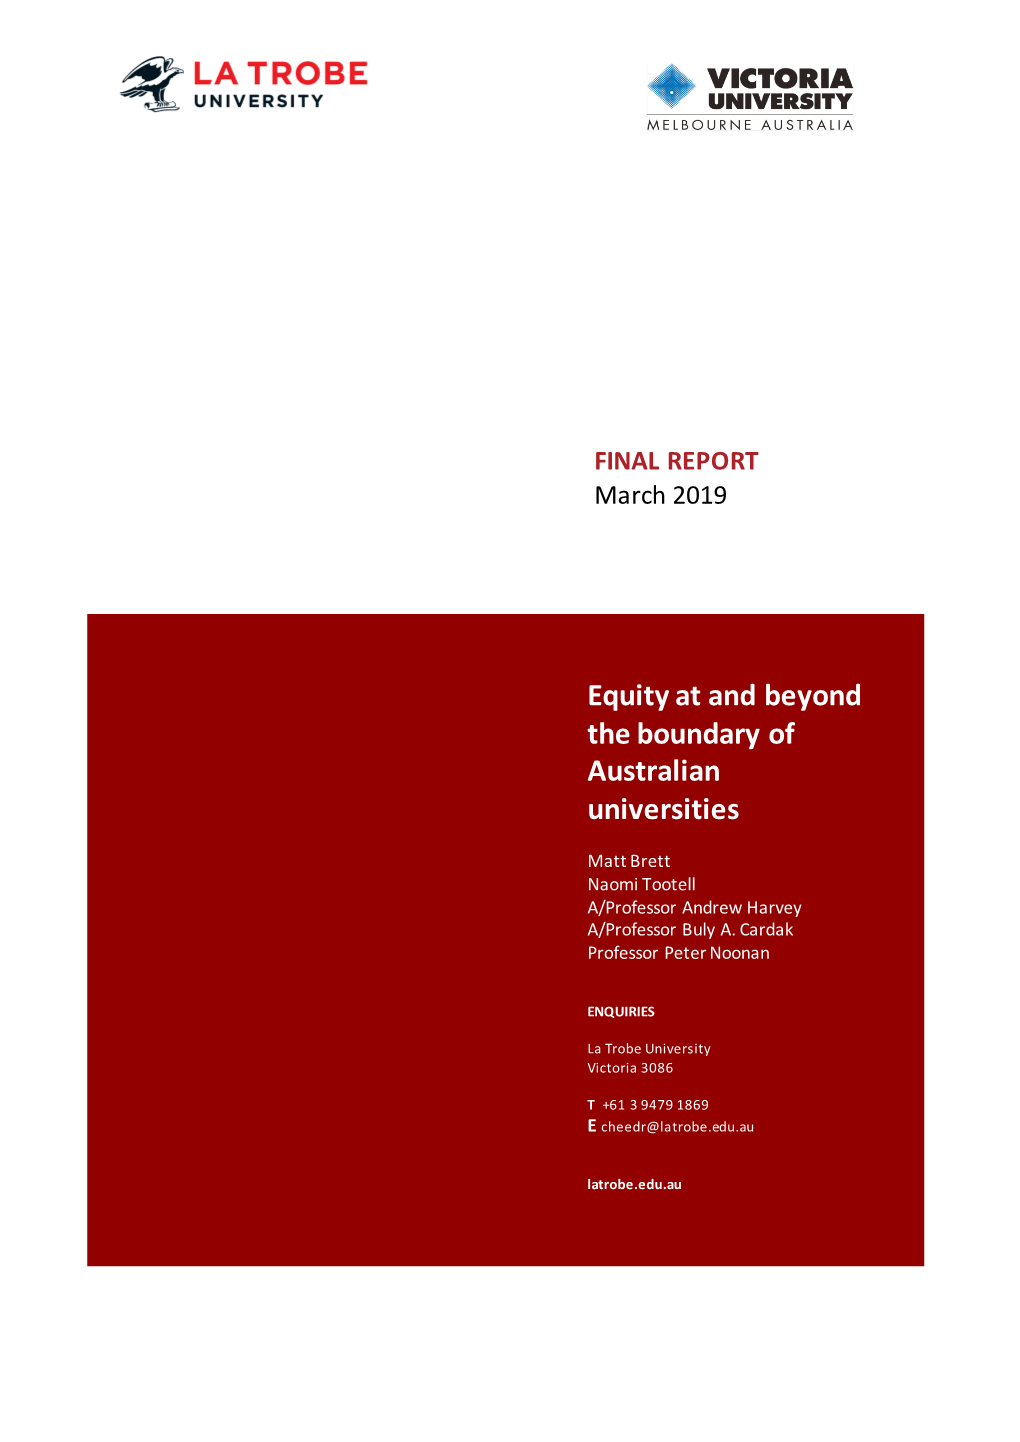 Equity at and Beyond the Boundary of Australian Universities (Report)